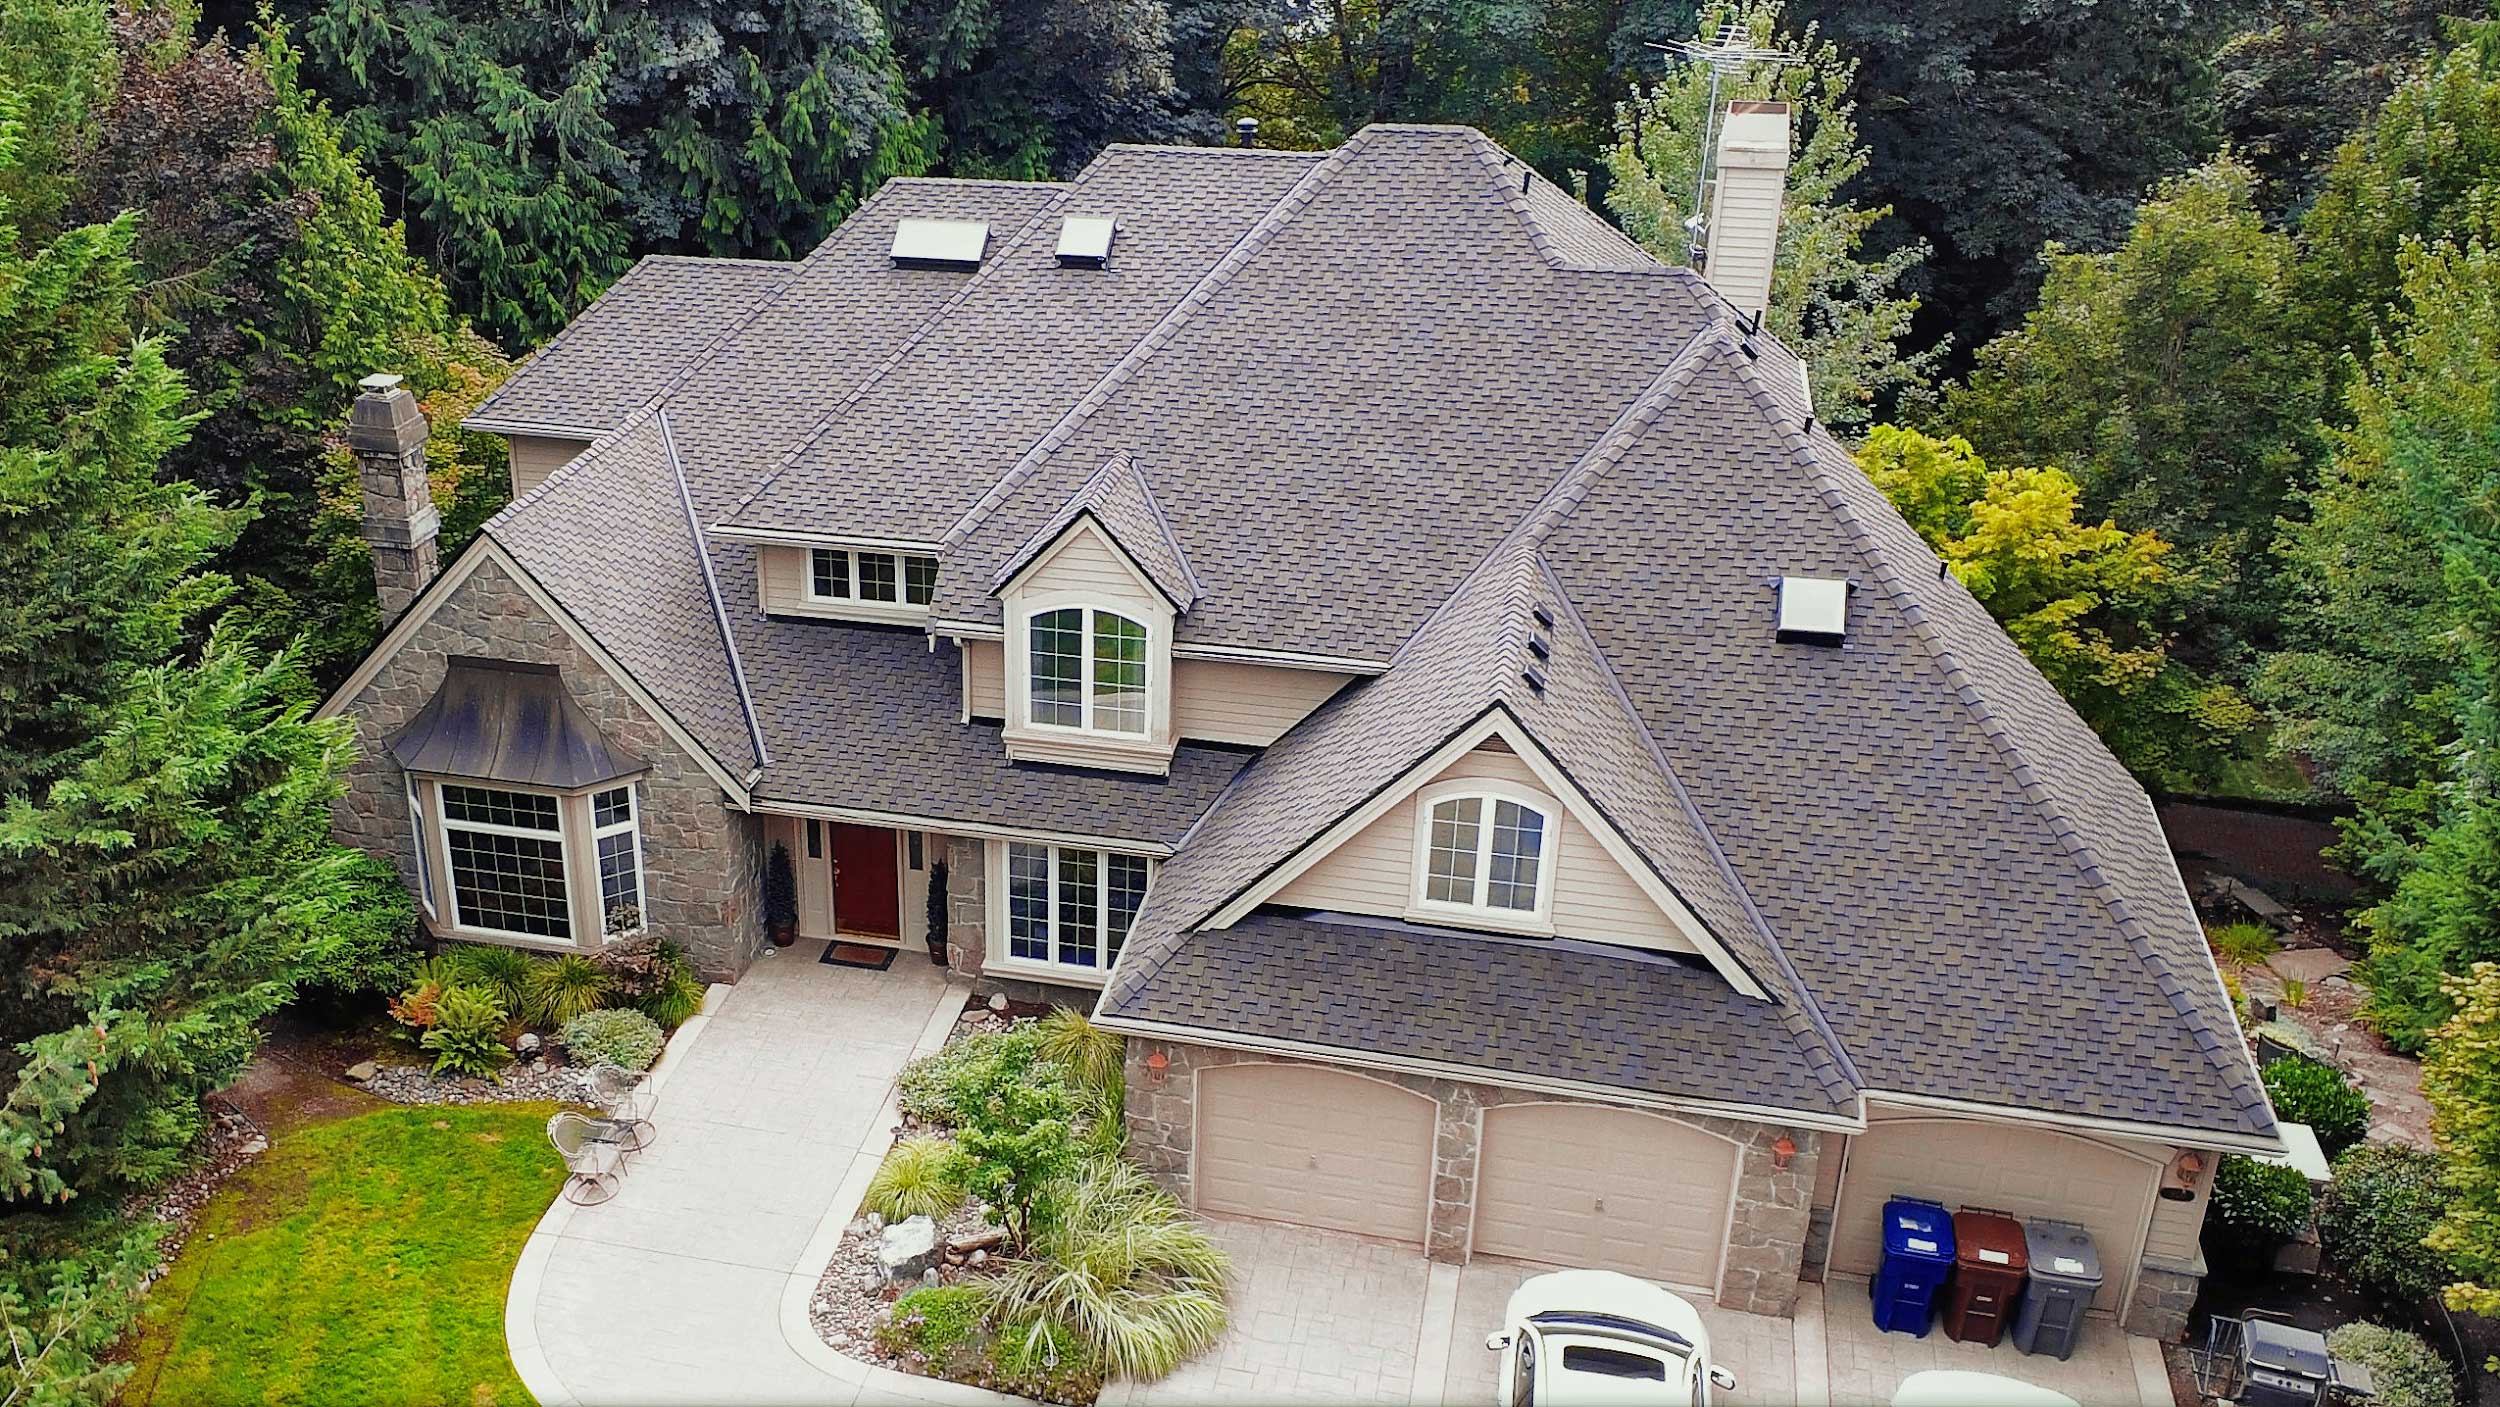 Three Tree Roofing’s composite roof portfolio projects, the 'Samammish Cedar Conversion'